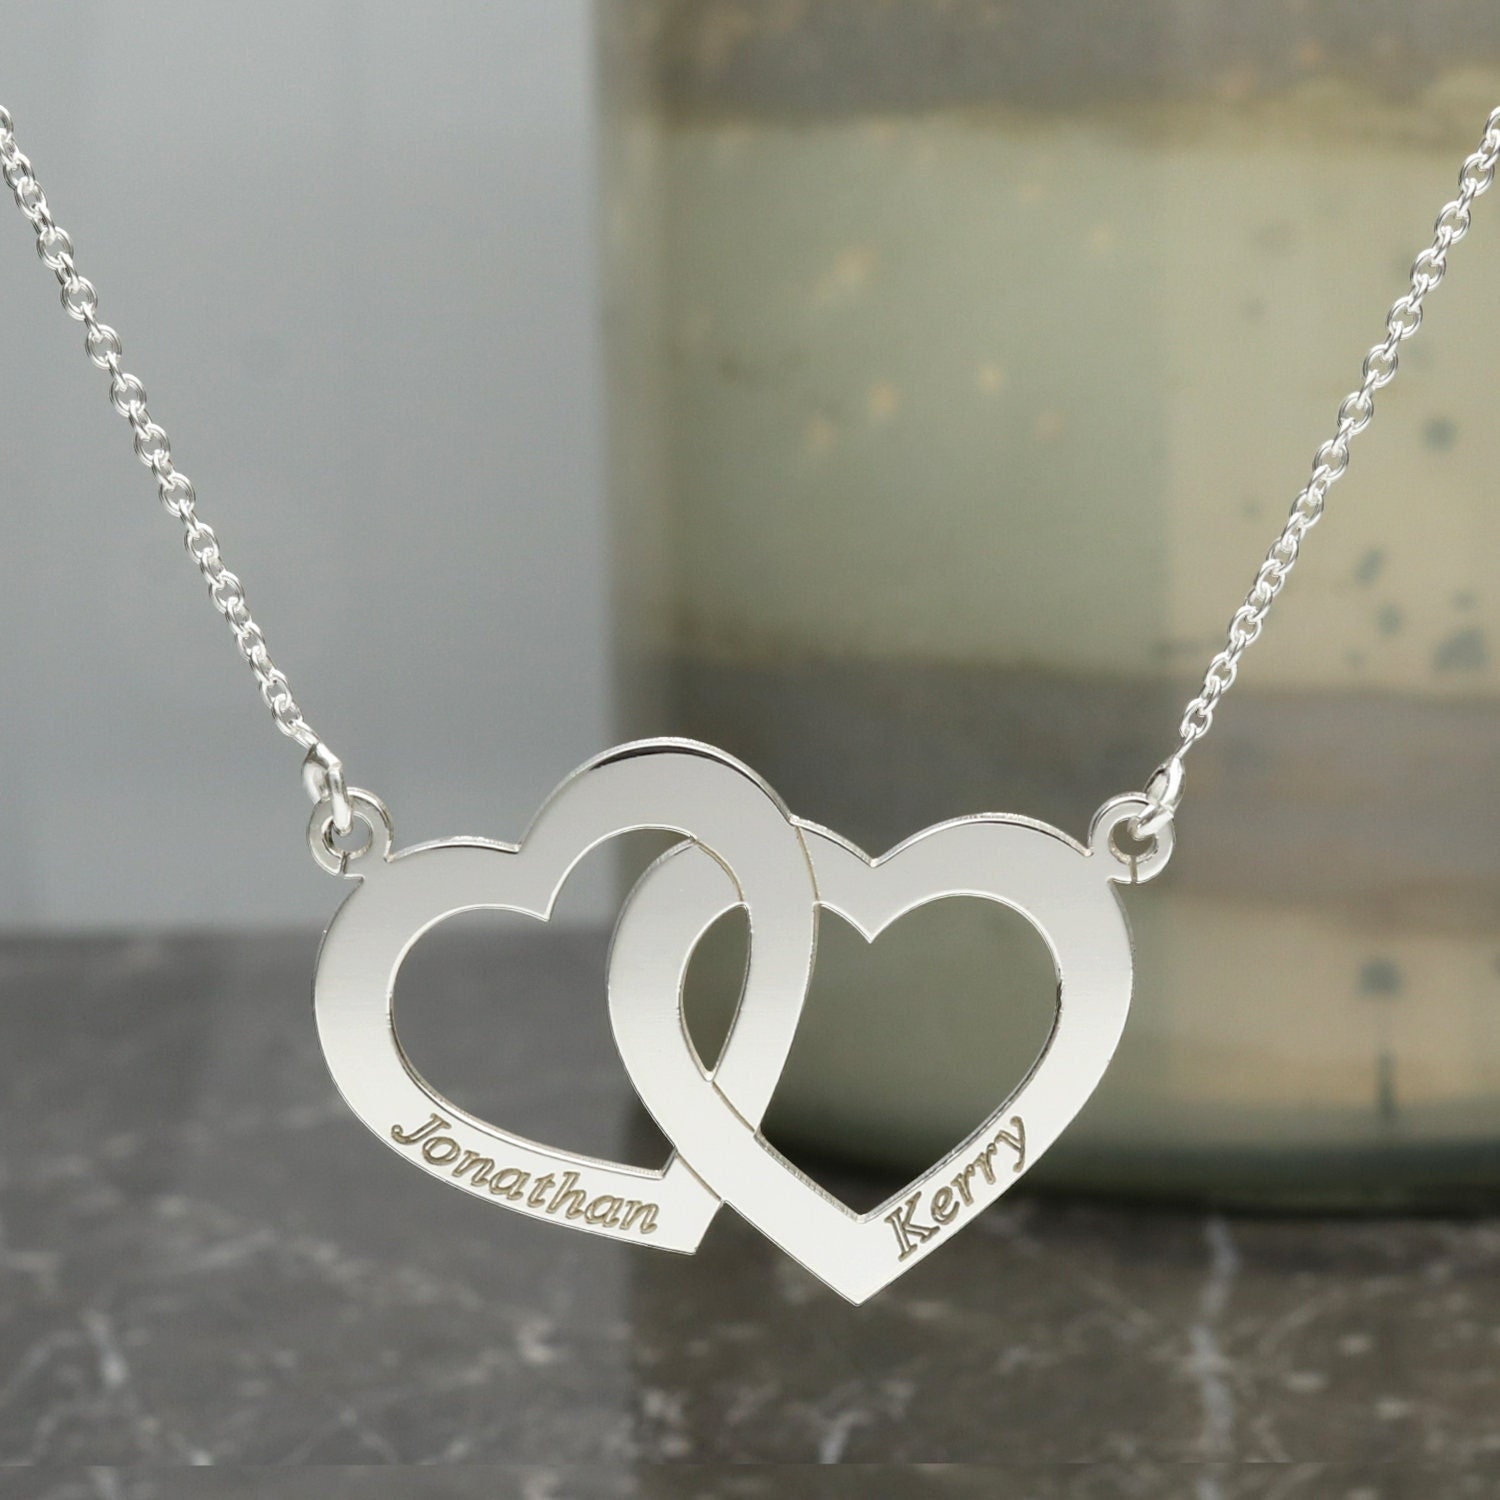 Custom Engraved Silver Mini Heart Necklace Flower Girl Necklace Valentine's Day Gift Personalized Heart Necklace Silver Heart Necklace